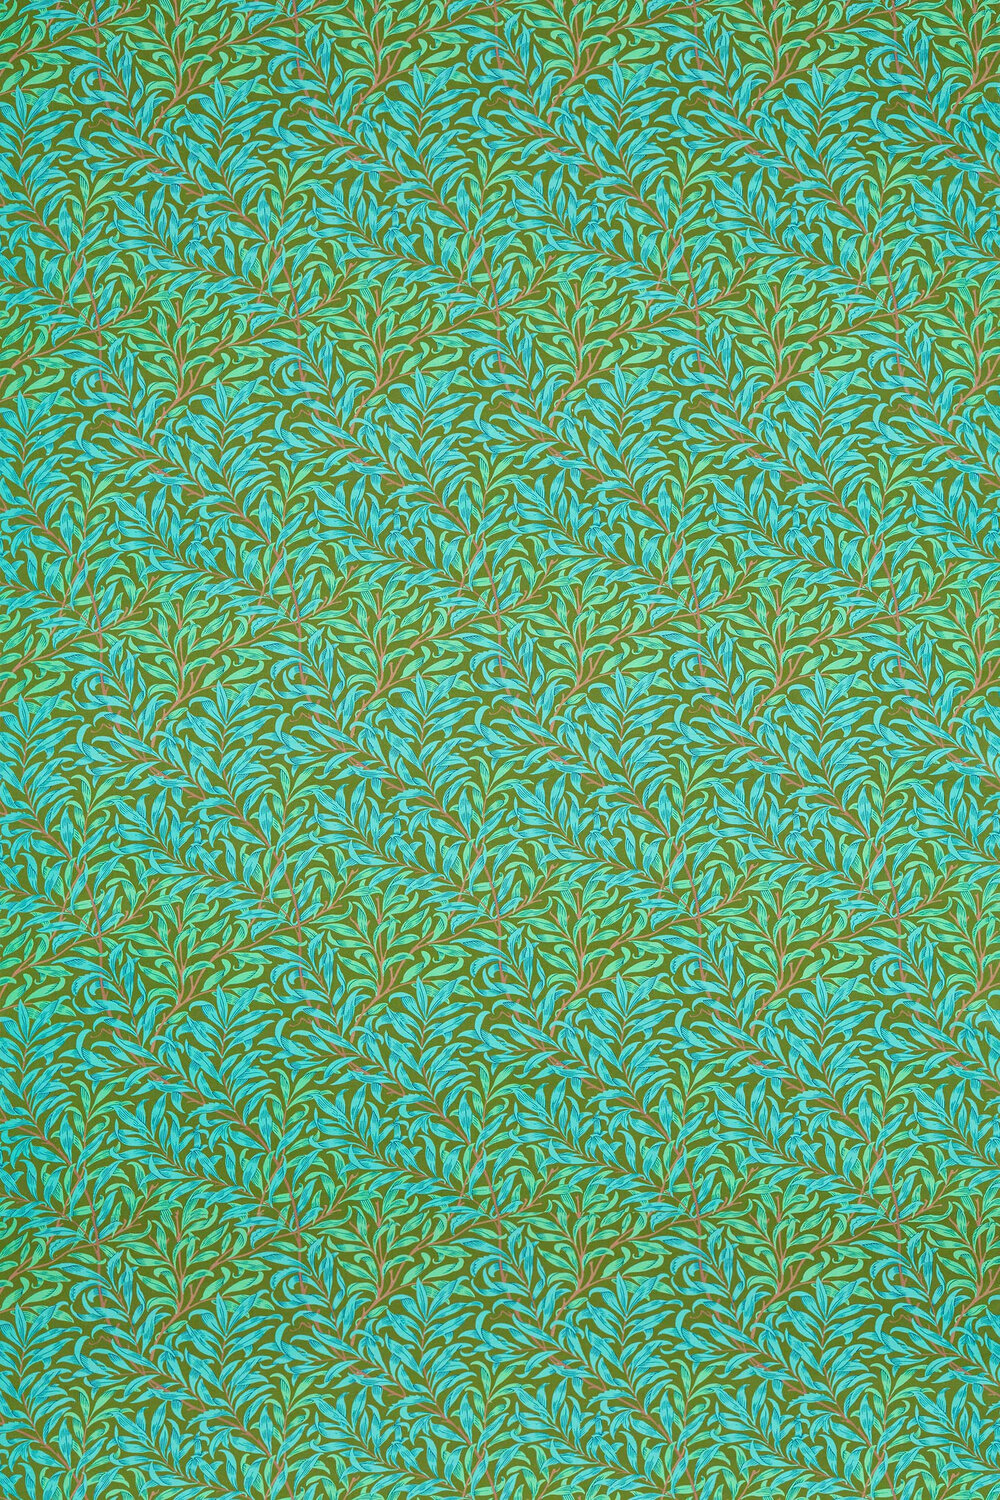 Willow Bough Fabric - Olive / Turquoise - by Morris